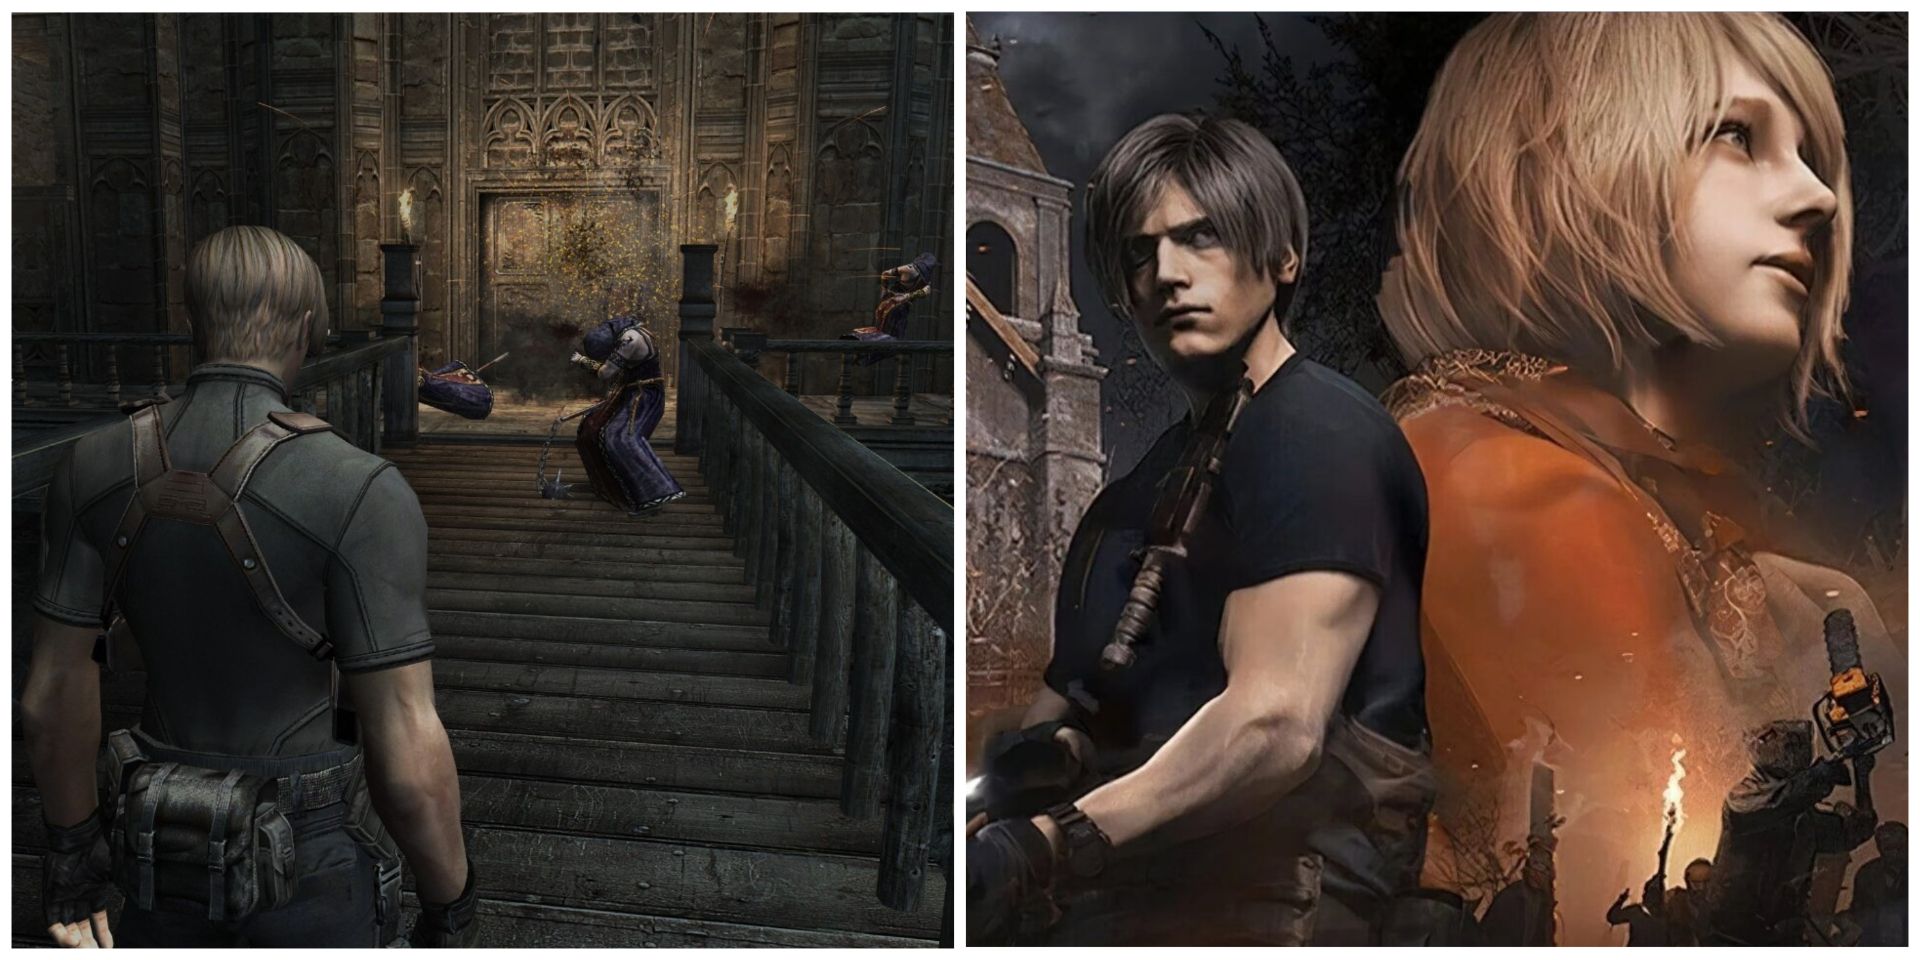 Resident Evil 4 Remake Review: Better Than The Original